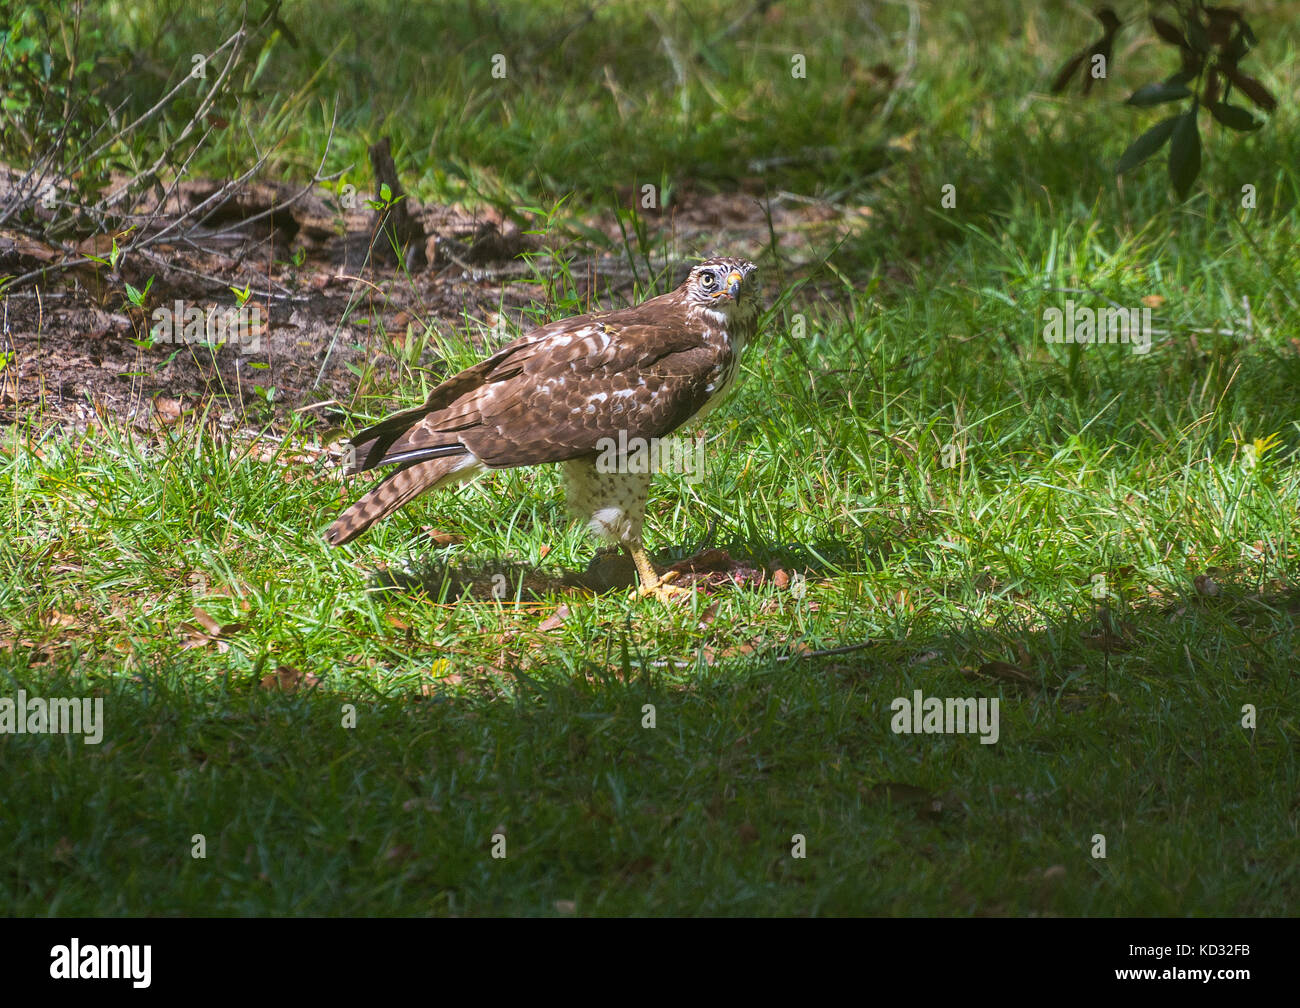 Red Shouldered Hawk eats a captured squirrel in a grassy area in North Central Florida. Stock Photo